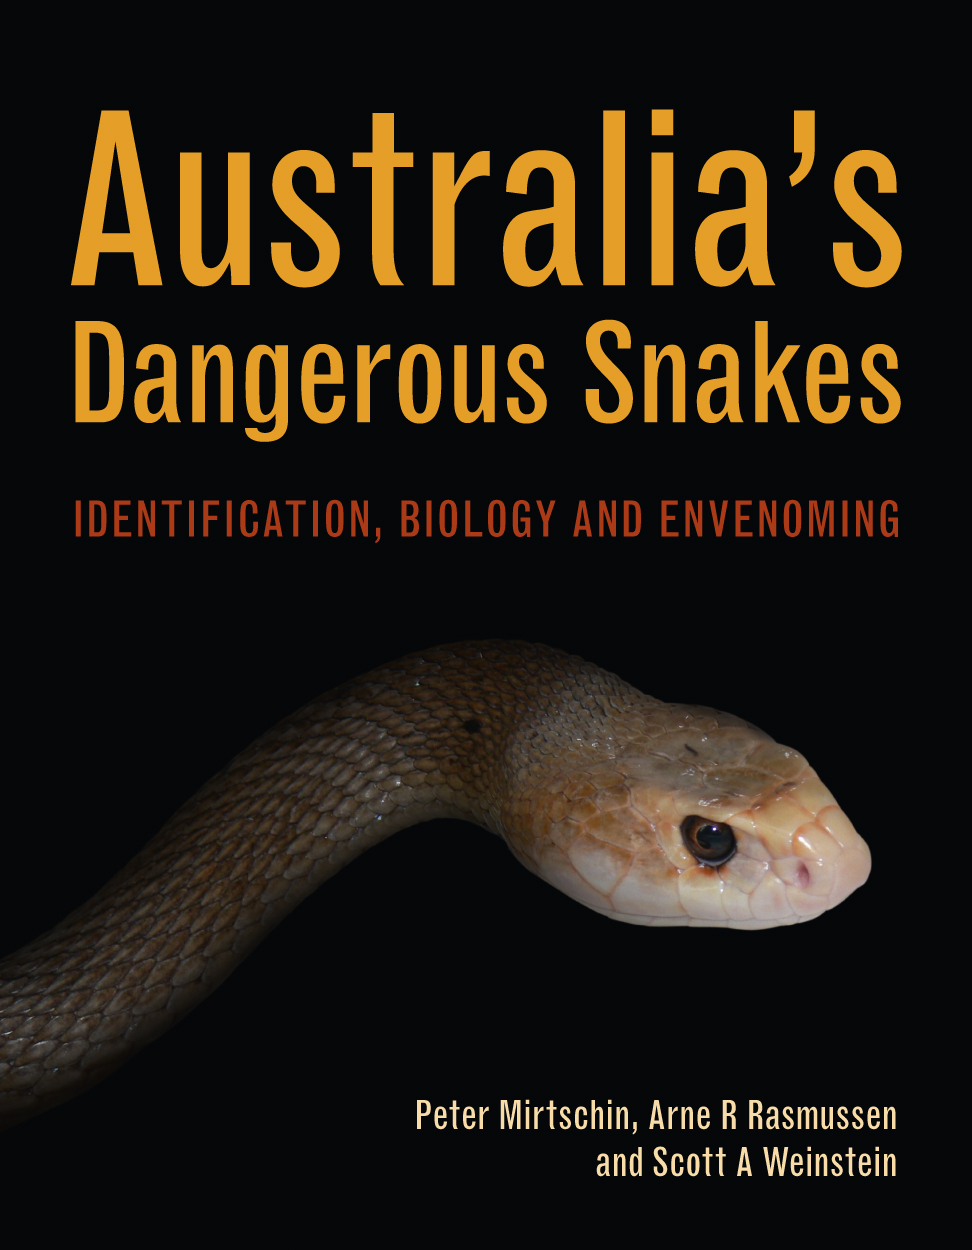 Cover of Australia's Dangerous Snakes featuring a close-up of the head of a taipan on a black background.